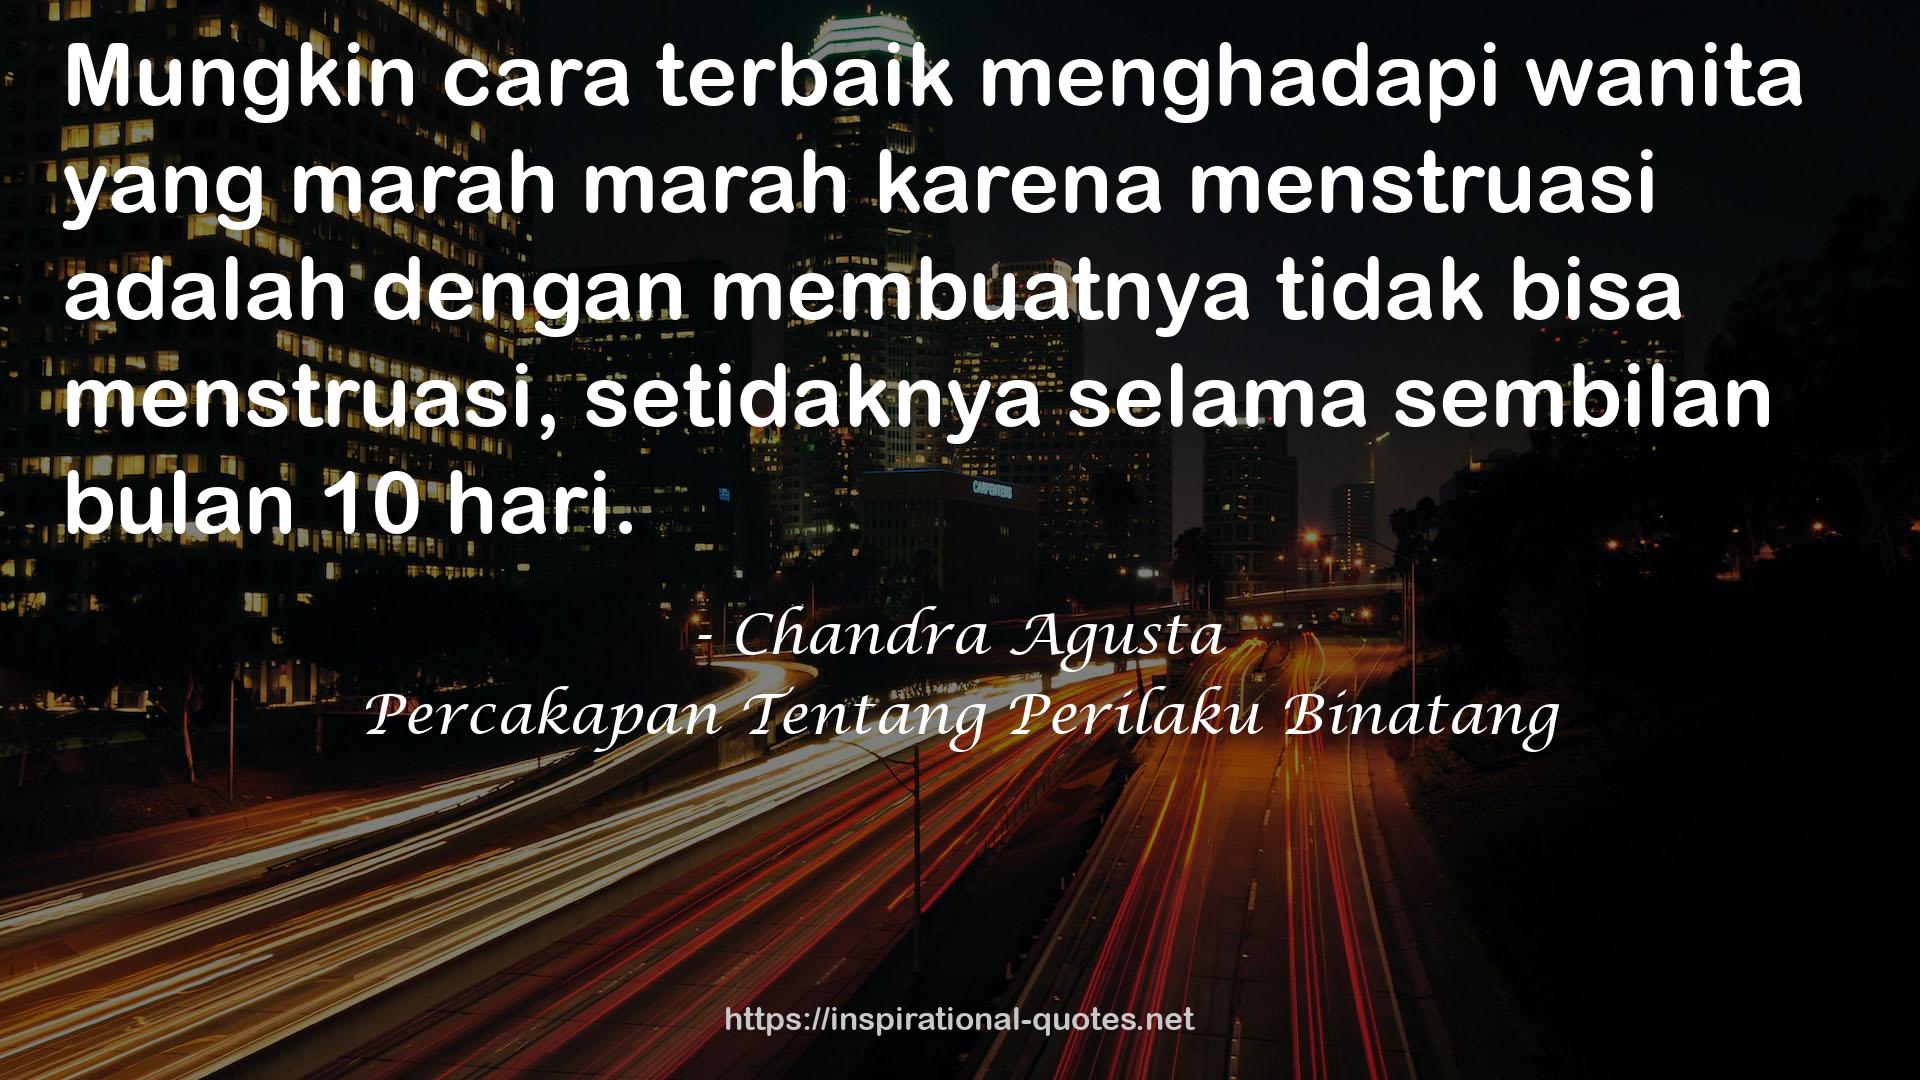 Chandra Agusta QUOTES